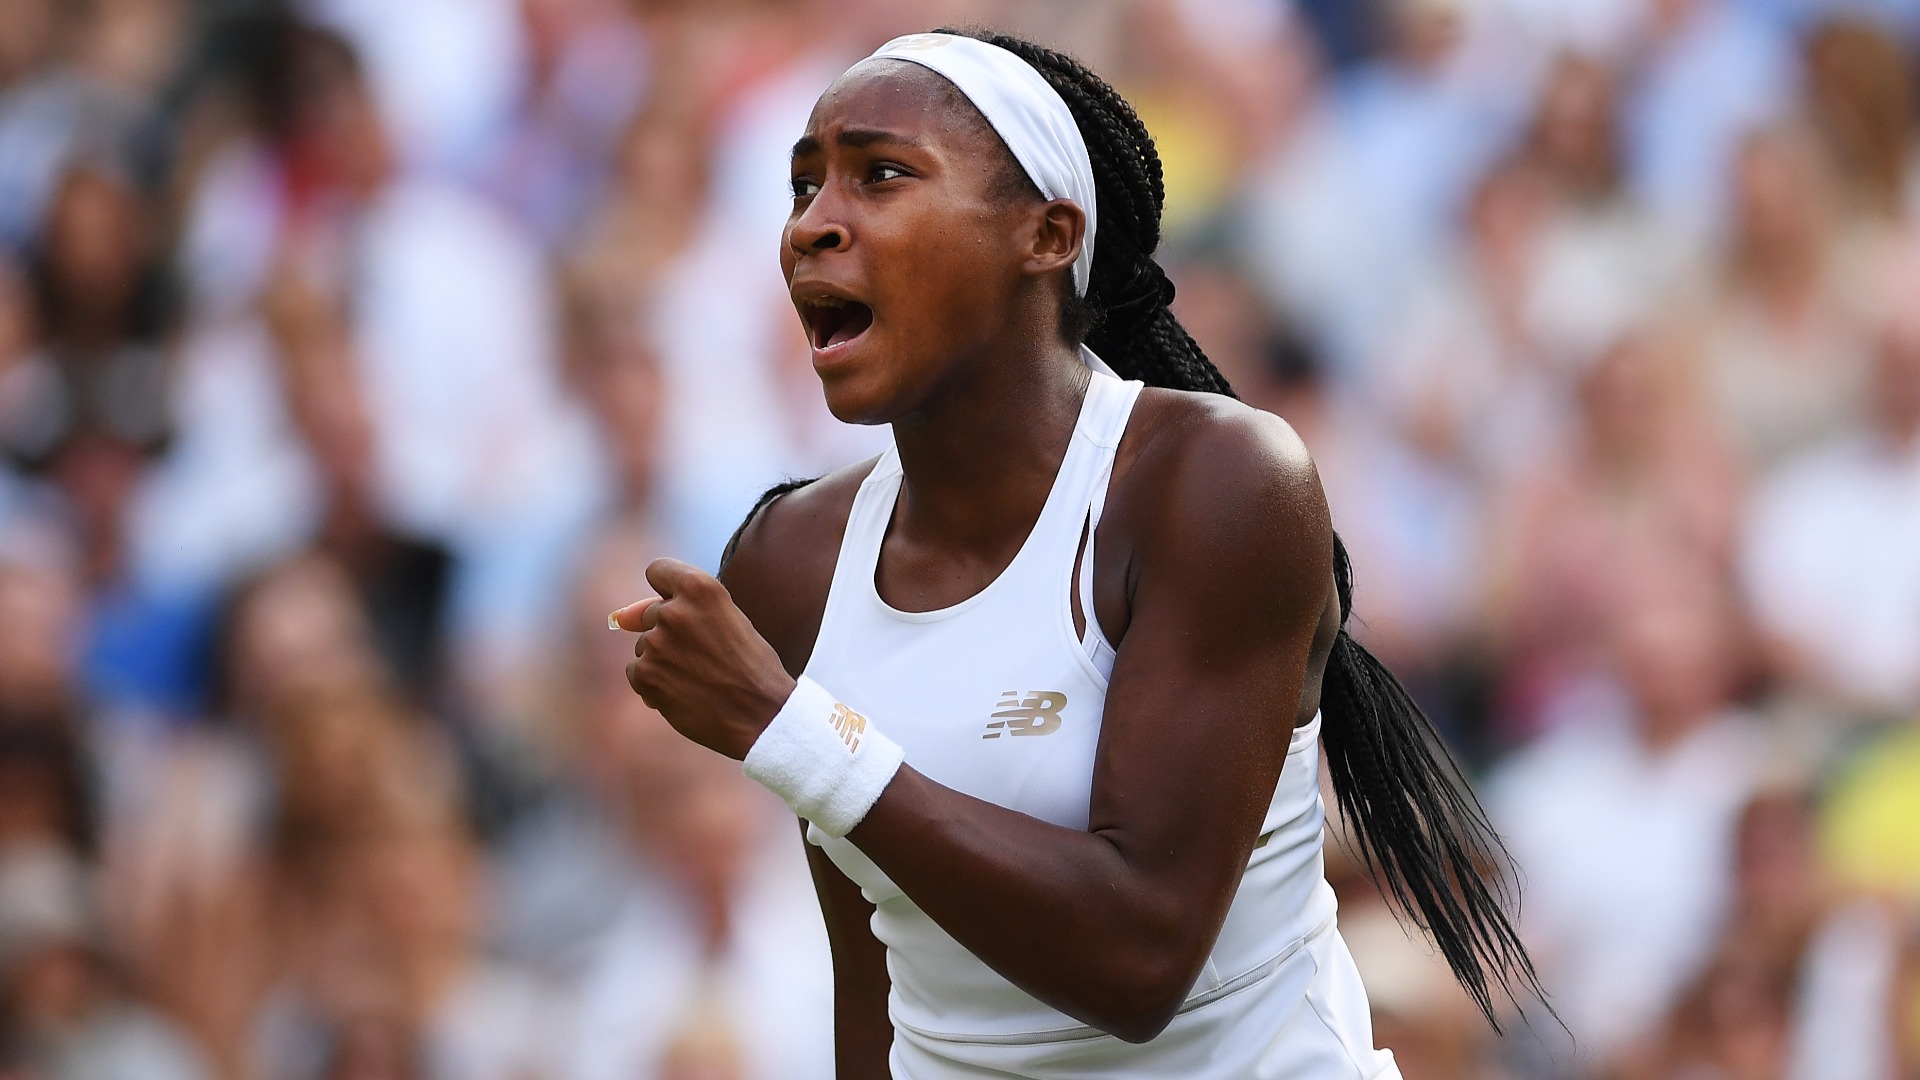 Having sparkled at Wimbledon, 15-year-old American Coco Gauff will get another chance at her home grand slam, the US Open.